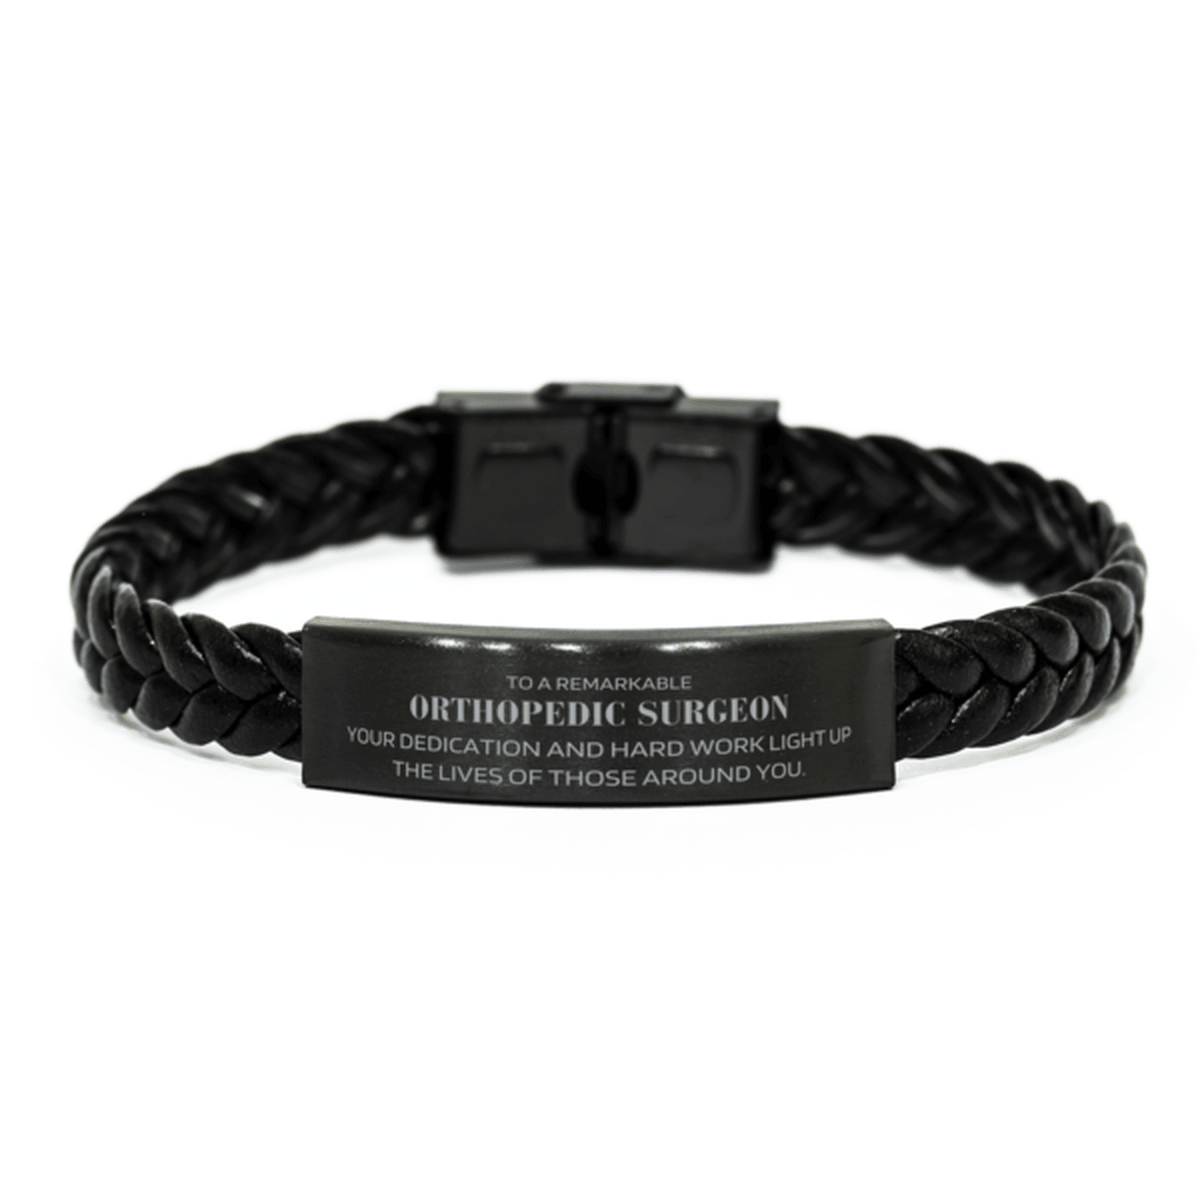 Remarkable Orthopedic Surgeon Gifts, Your dedication and hard work, Inspirational Birthday Christmas Unique Braided Leather Bracelet For Orthopedic Surgeon, Coworkers, Men, Women, Friends